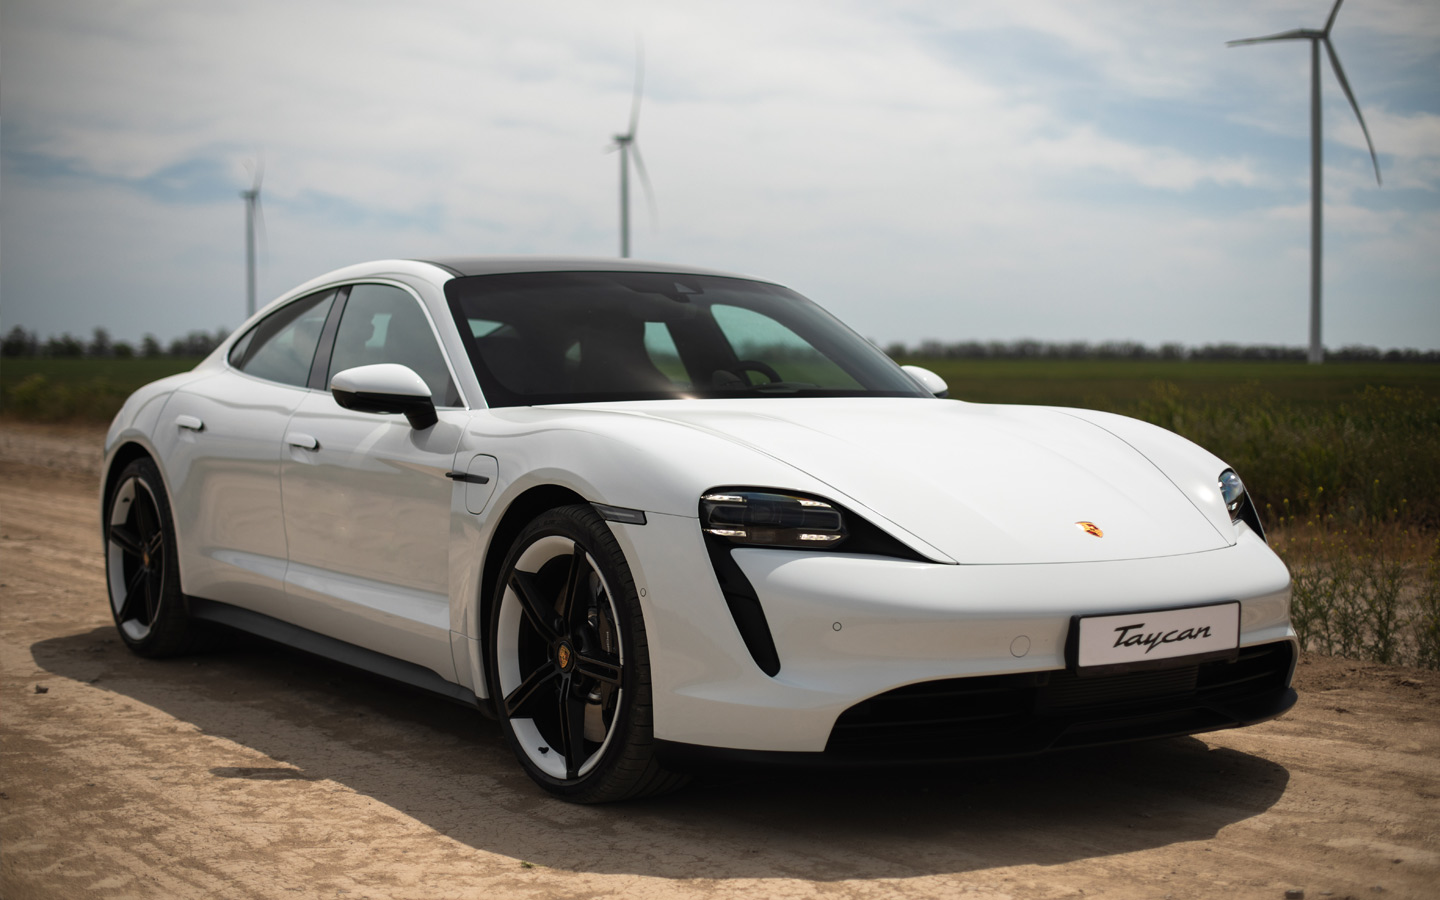 Porsche Taycan can reach from 0 to 100 km/h in 5.4 seconds